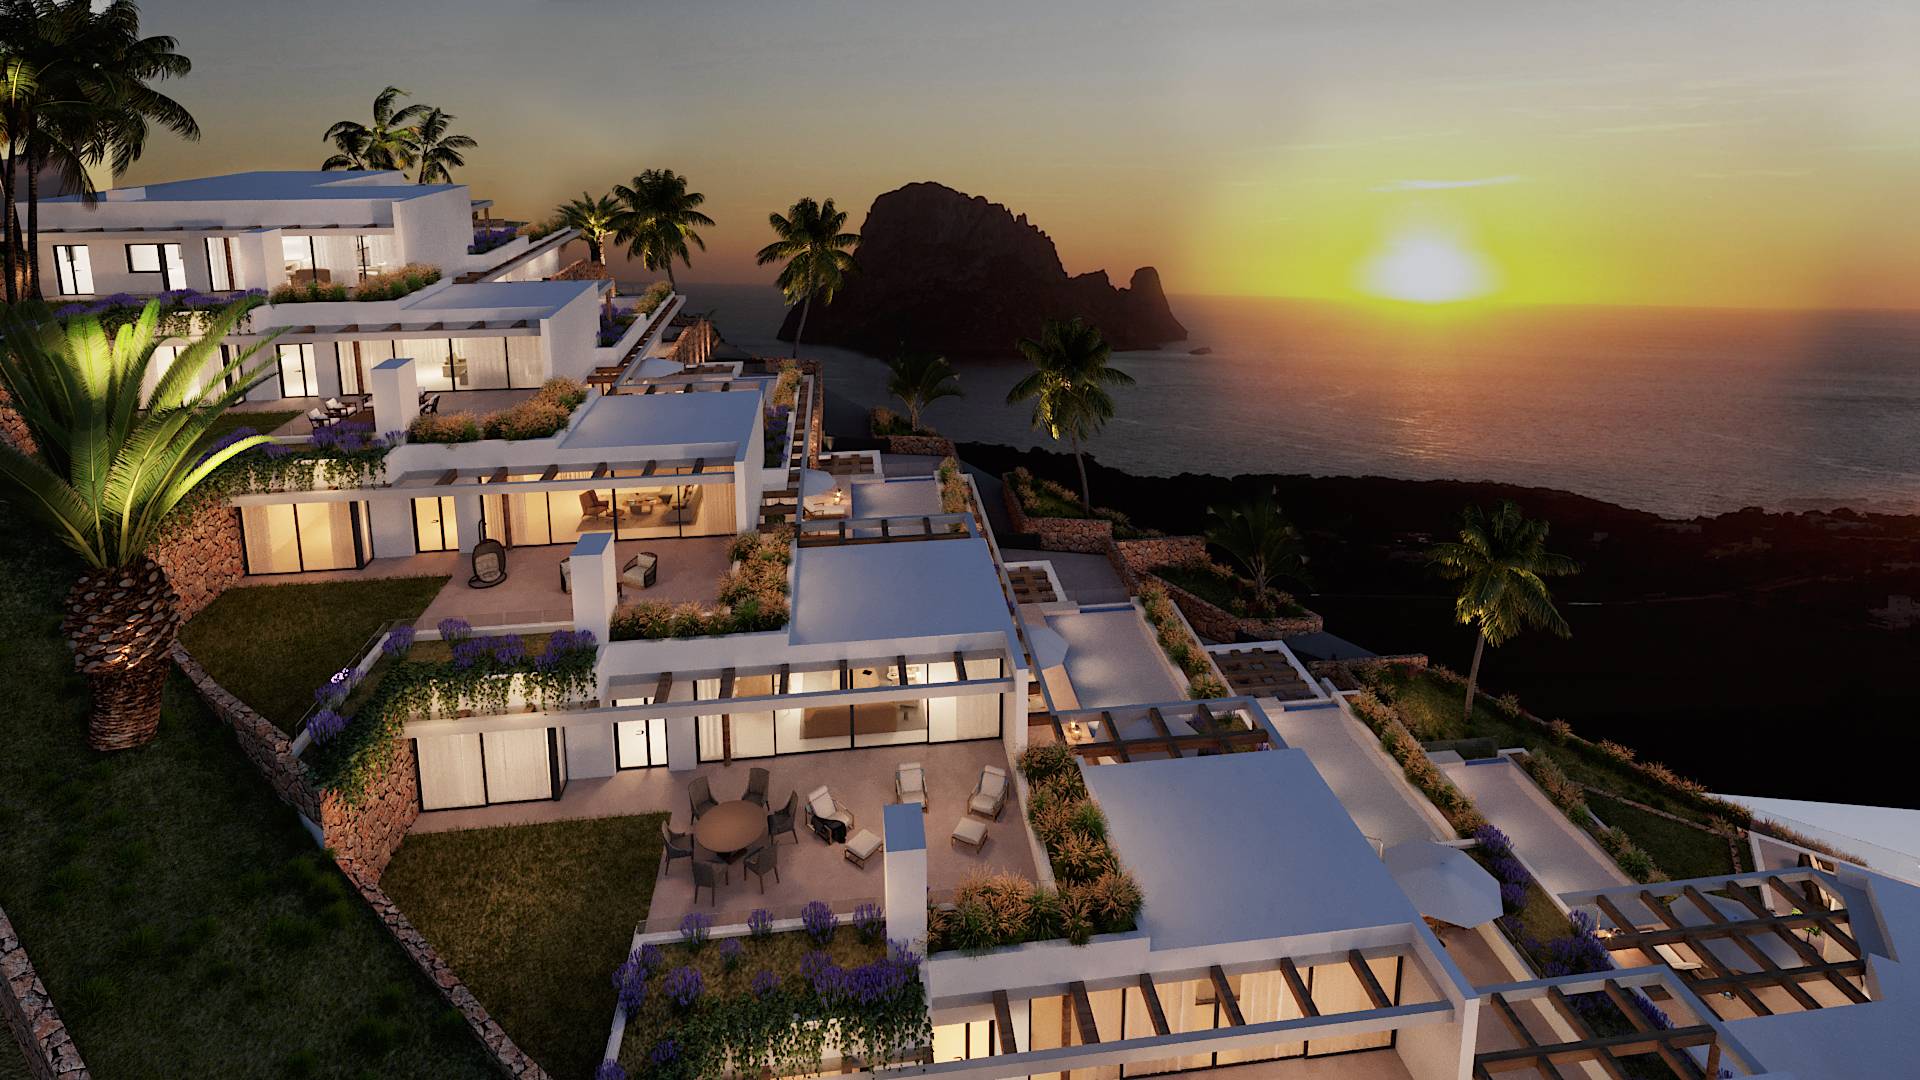 Luxury Semi-Detached Villas With Private Pools & Sunset Views